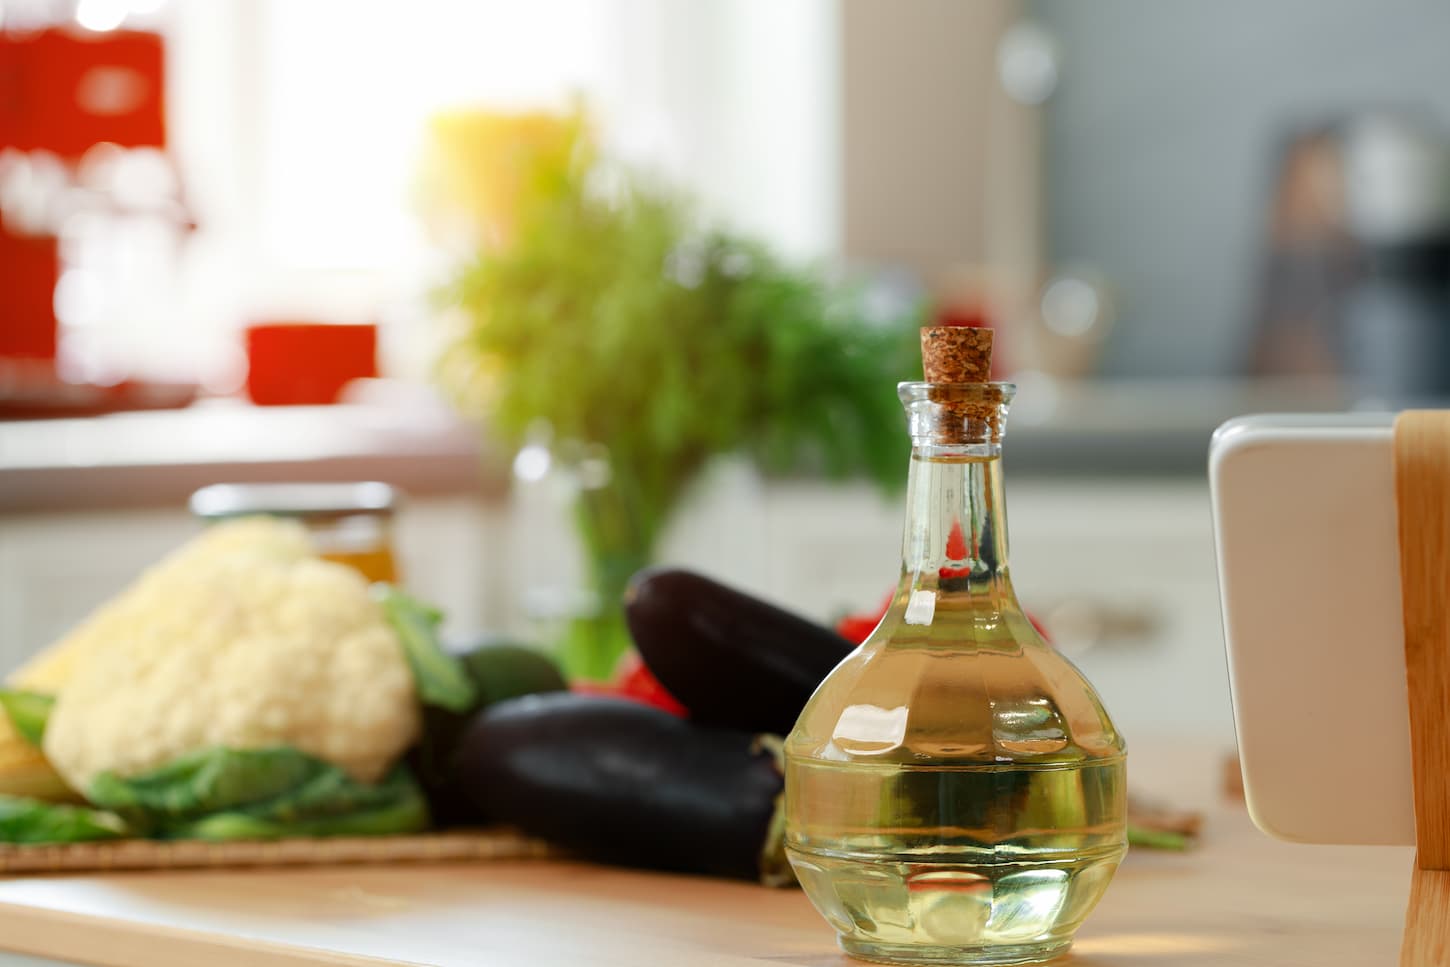 An image of glass bottle of oil on wooden kitchen counter.